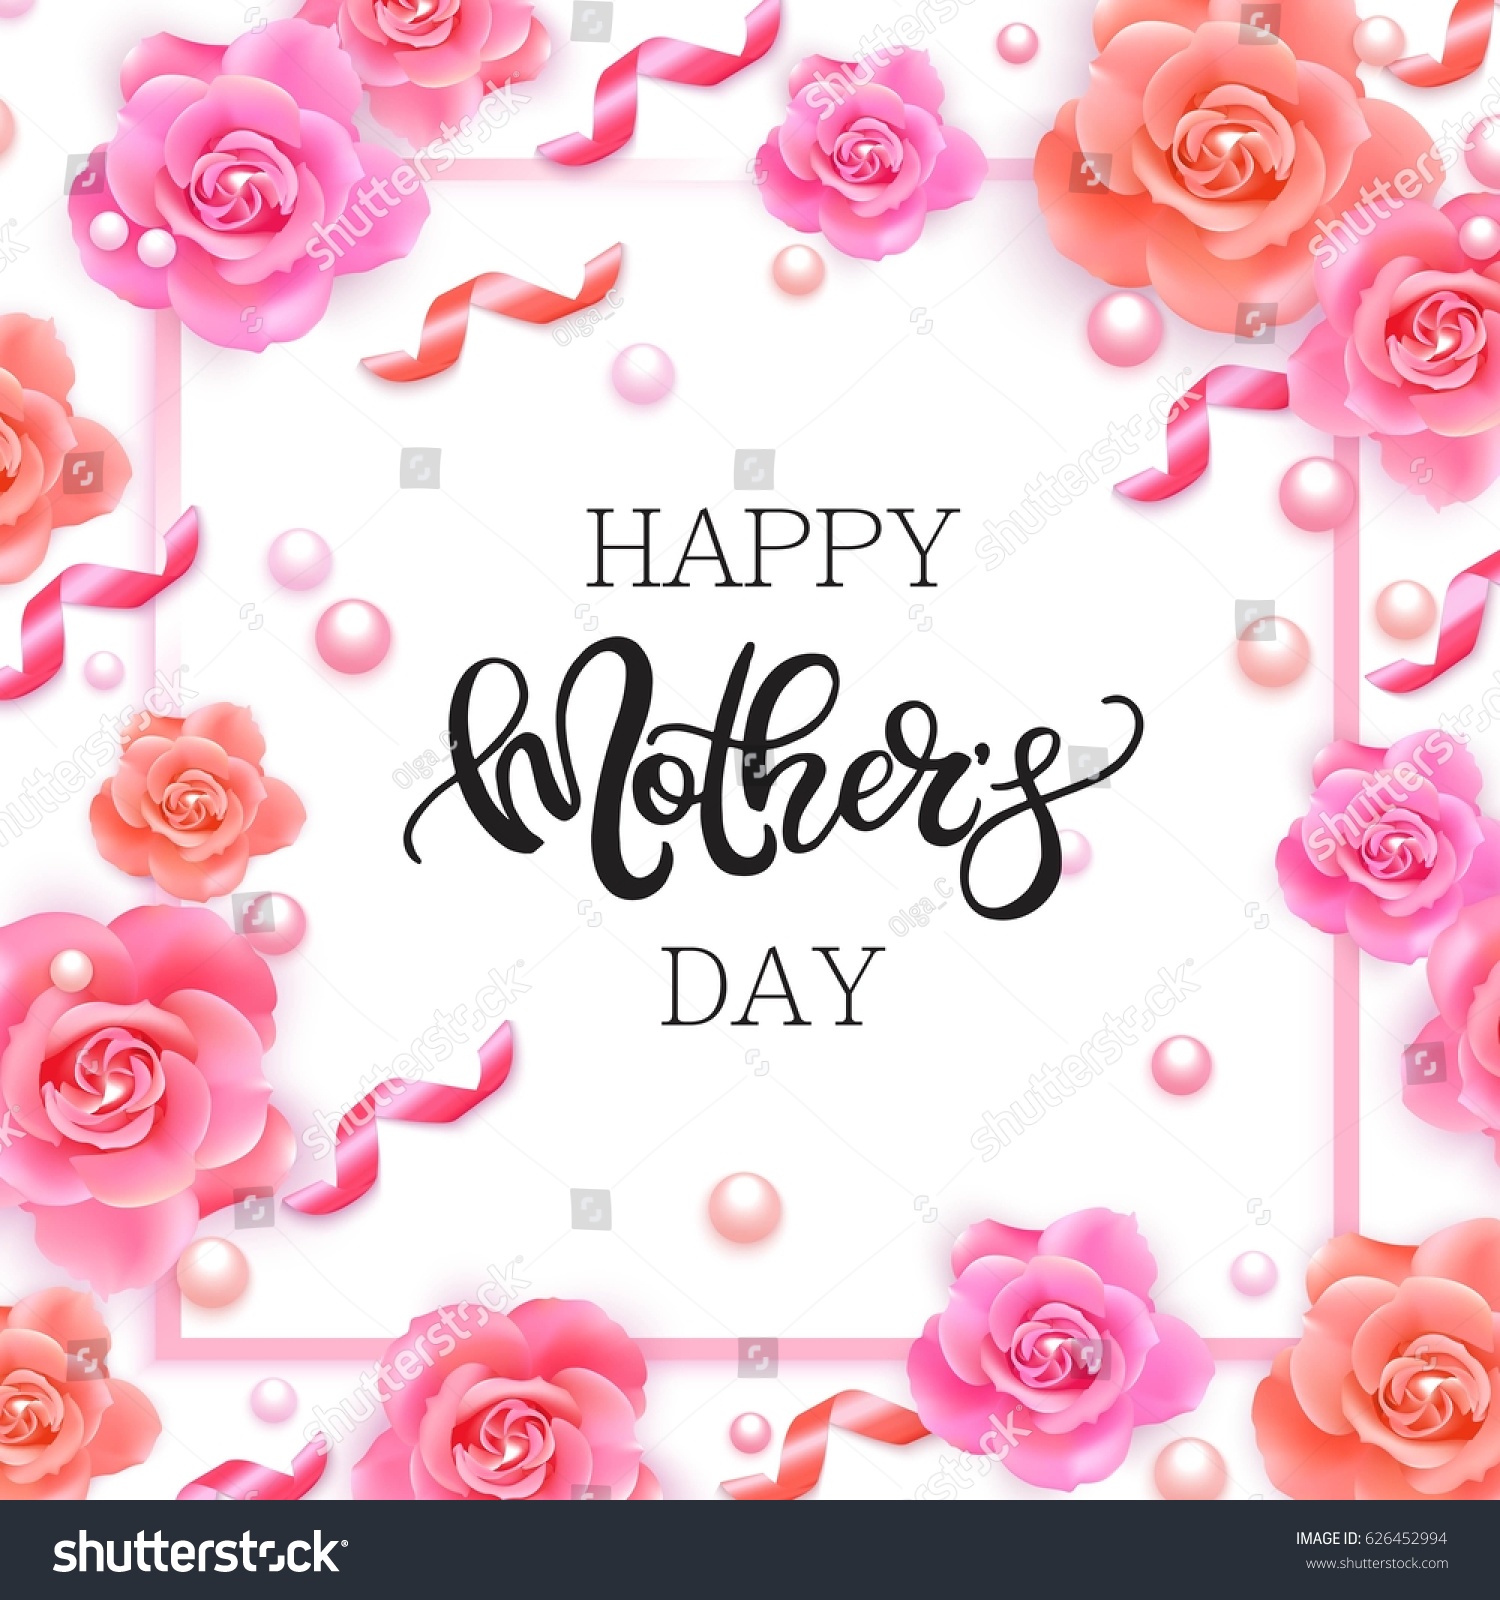 Happy Mother's Day vector hand written poster with pink roses, ribbons and pearls.  #626452994